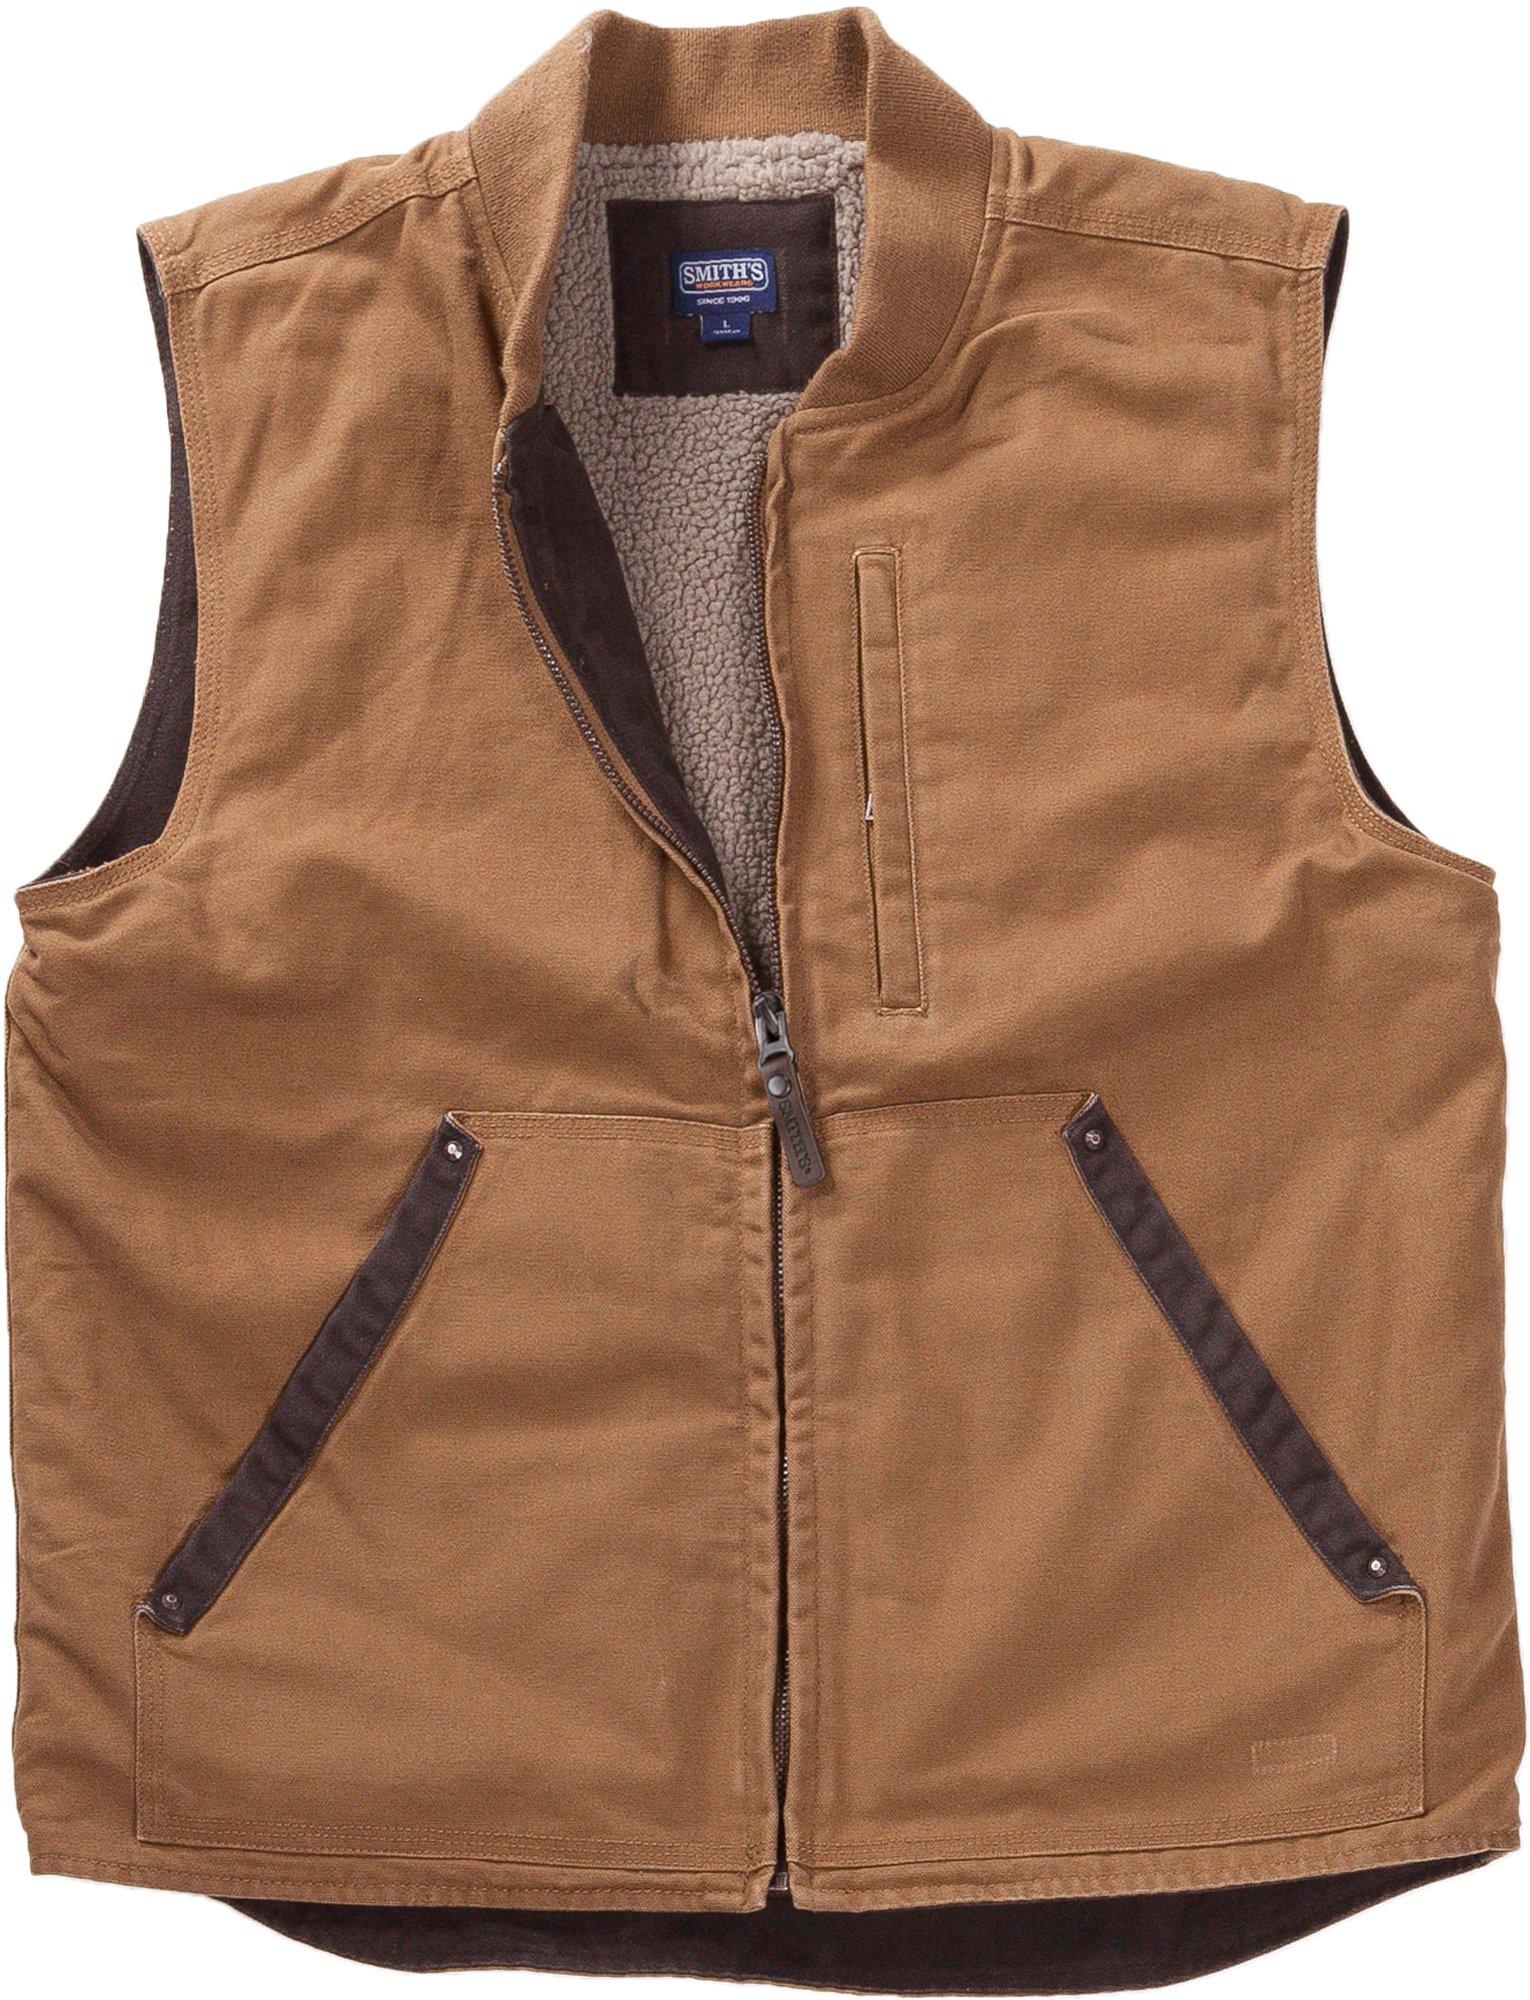 Mens Sherpa Lined Duck Canvas Vest